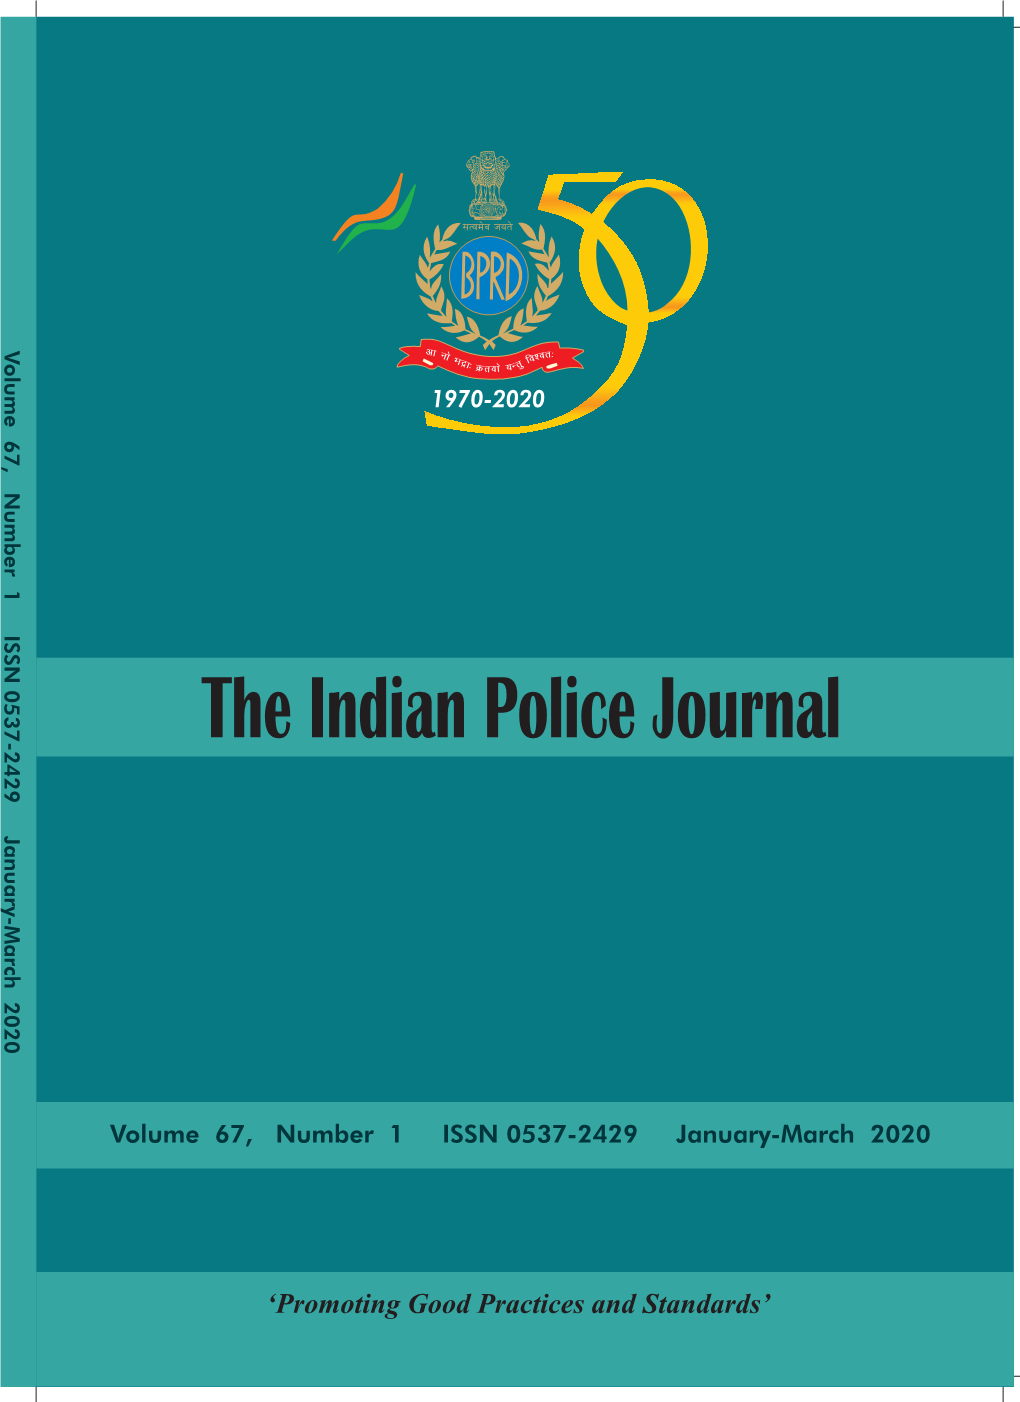 The Indian Police Journal -March 2020